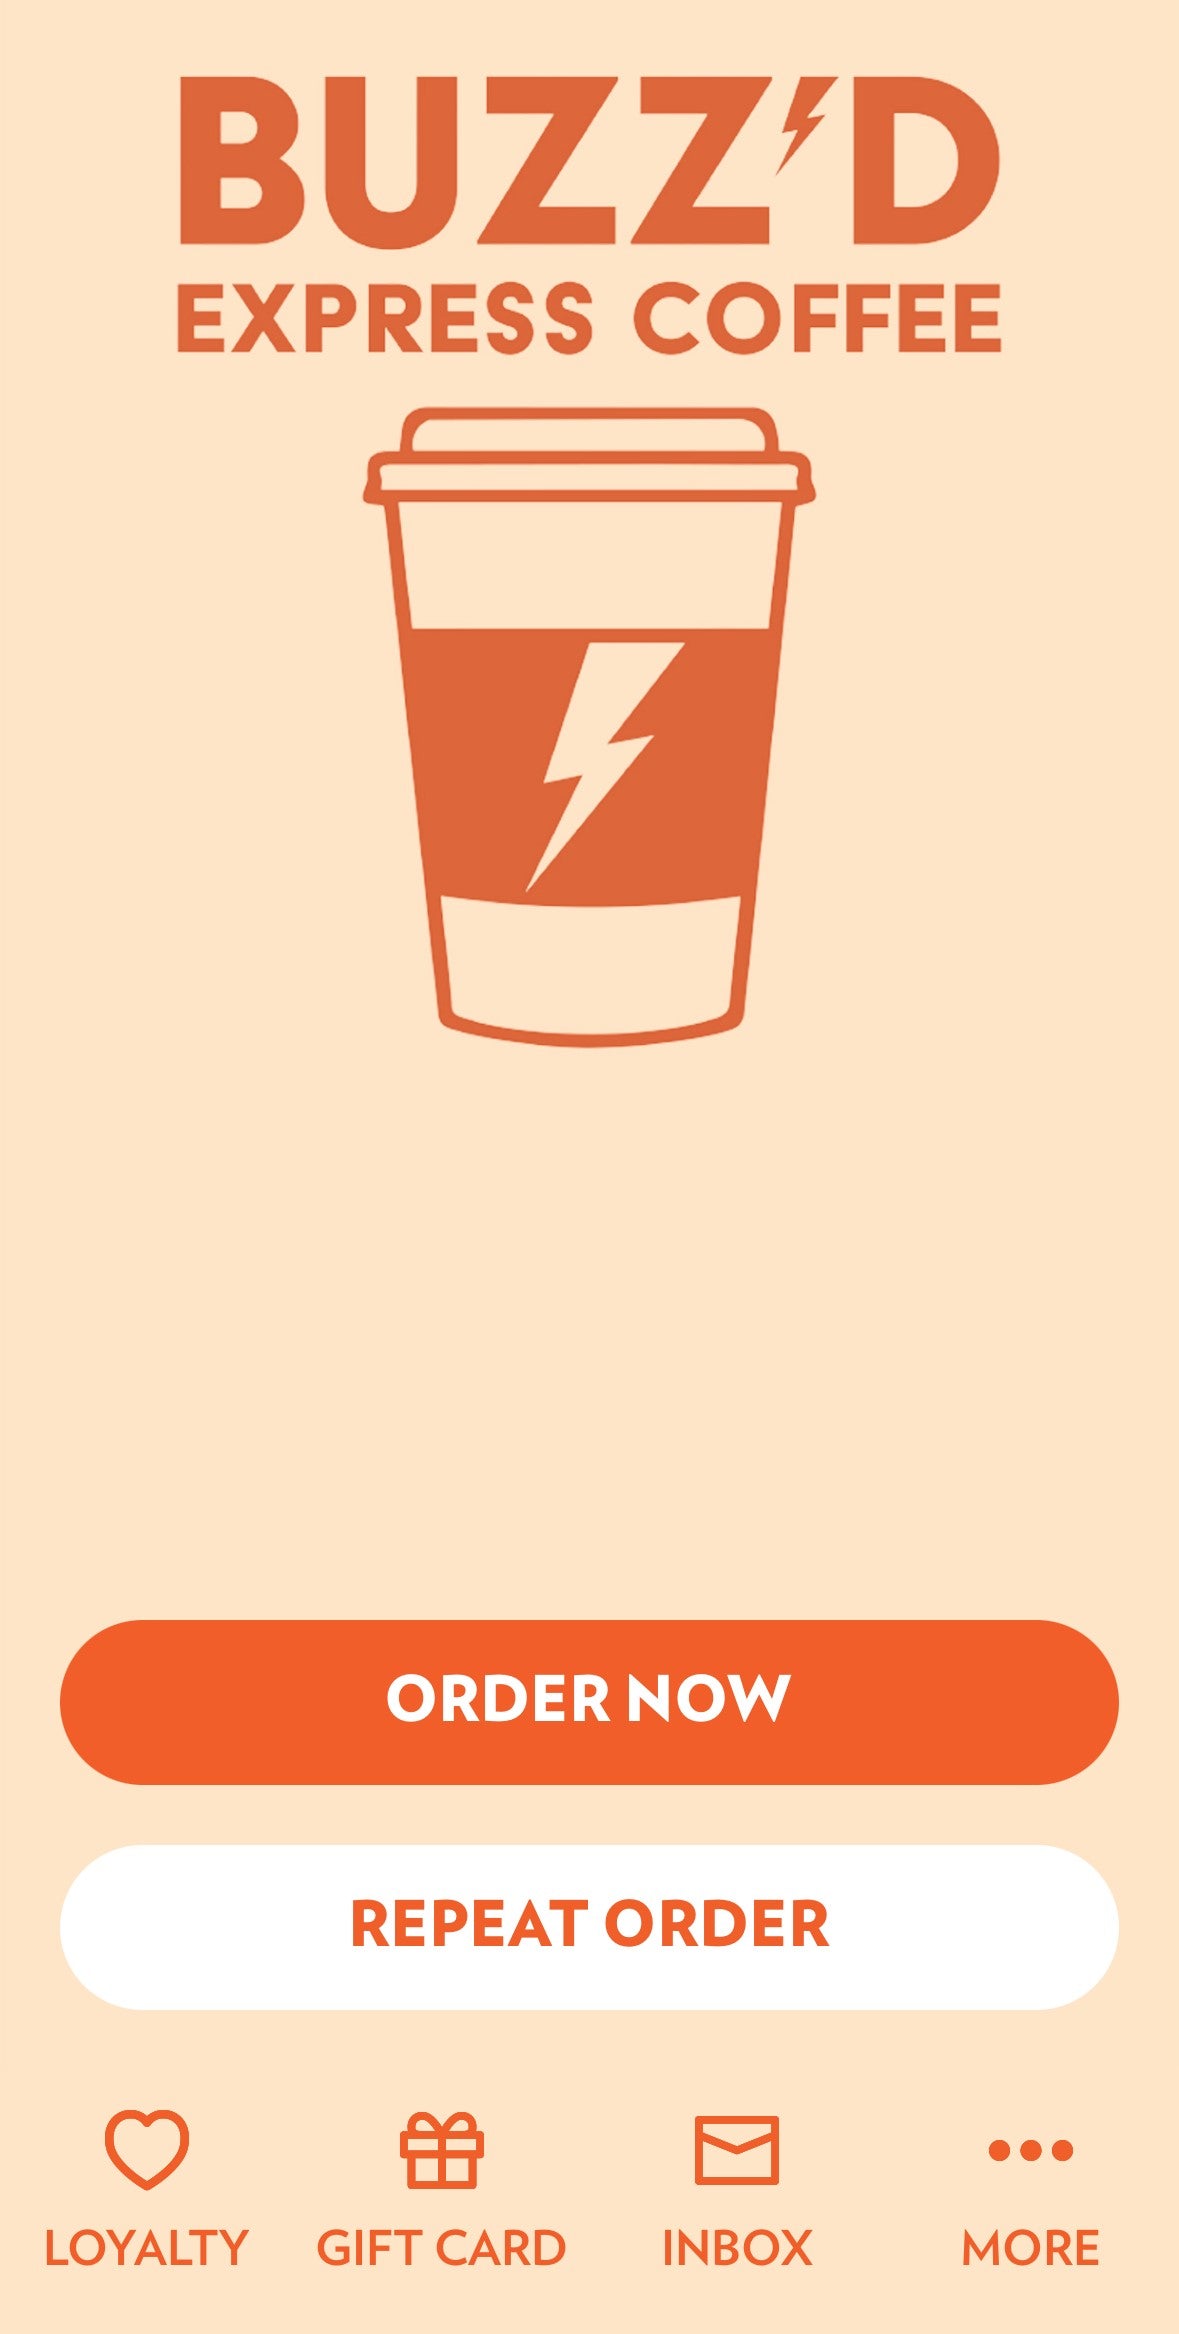 Download our Mobile app for Free Drink!